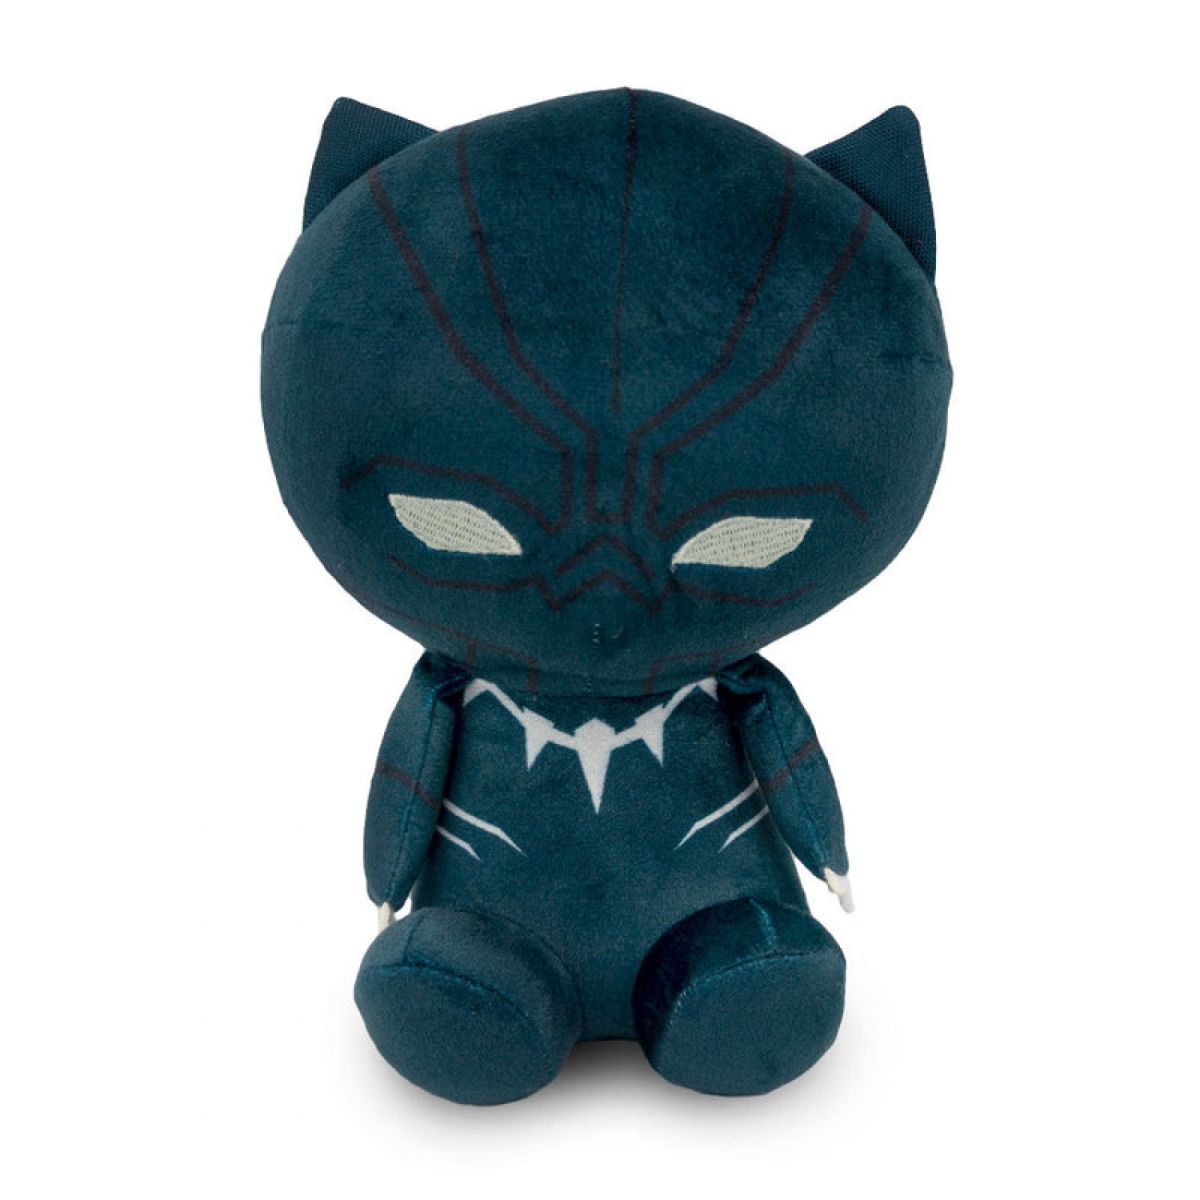 Picture of Black Panther 850381 Black Panther Full Body Sitting Pose Plush Squeaky Dog Toy